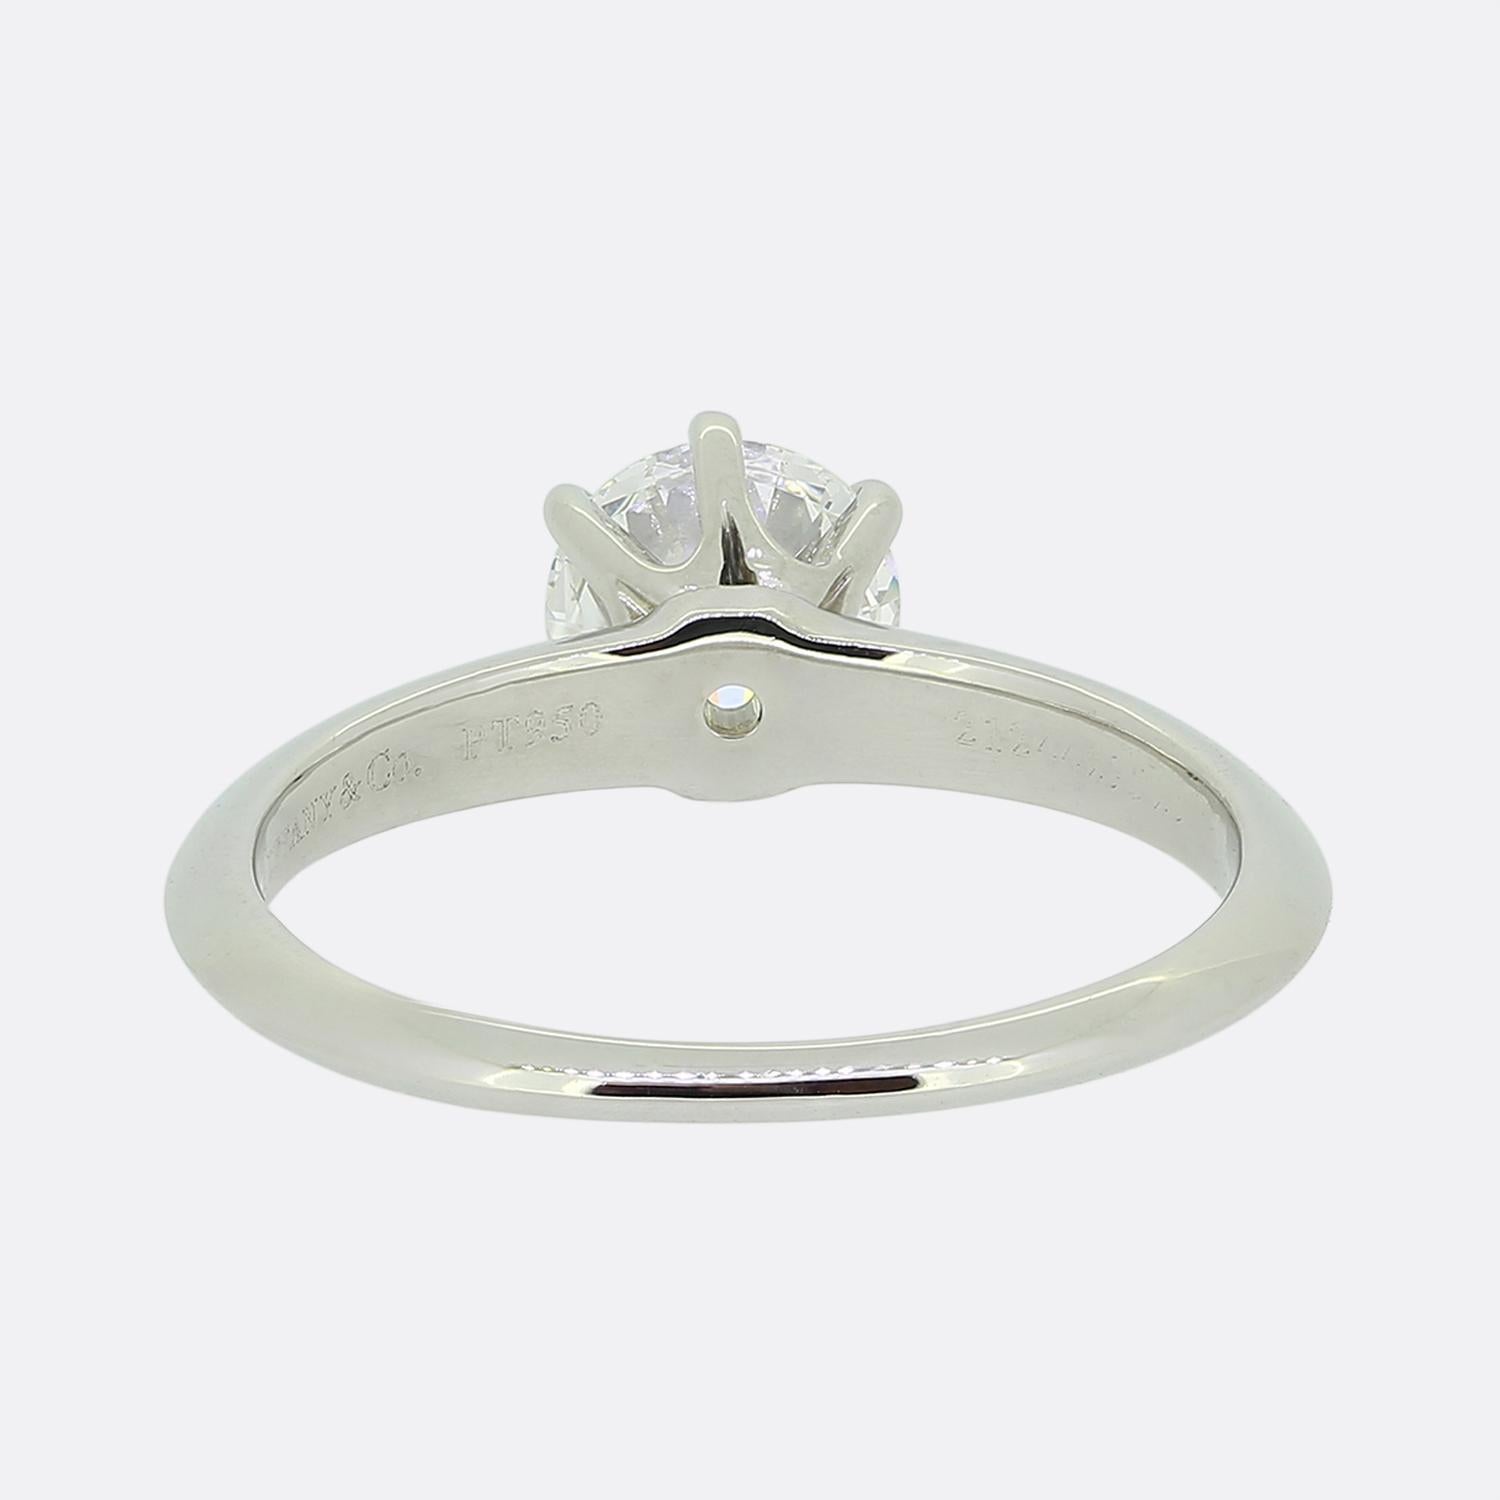 Tiffany & Co. 1.01 Carat Diamond Engagement Ring In Good Condition For Sale In London, GB